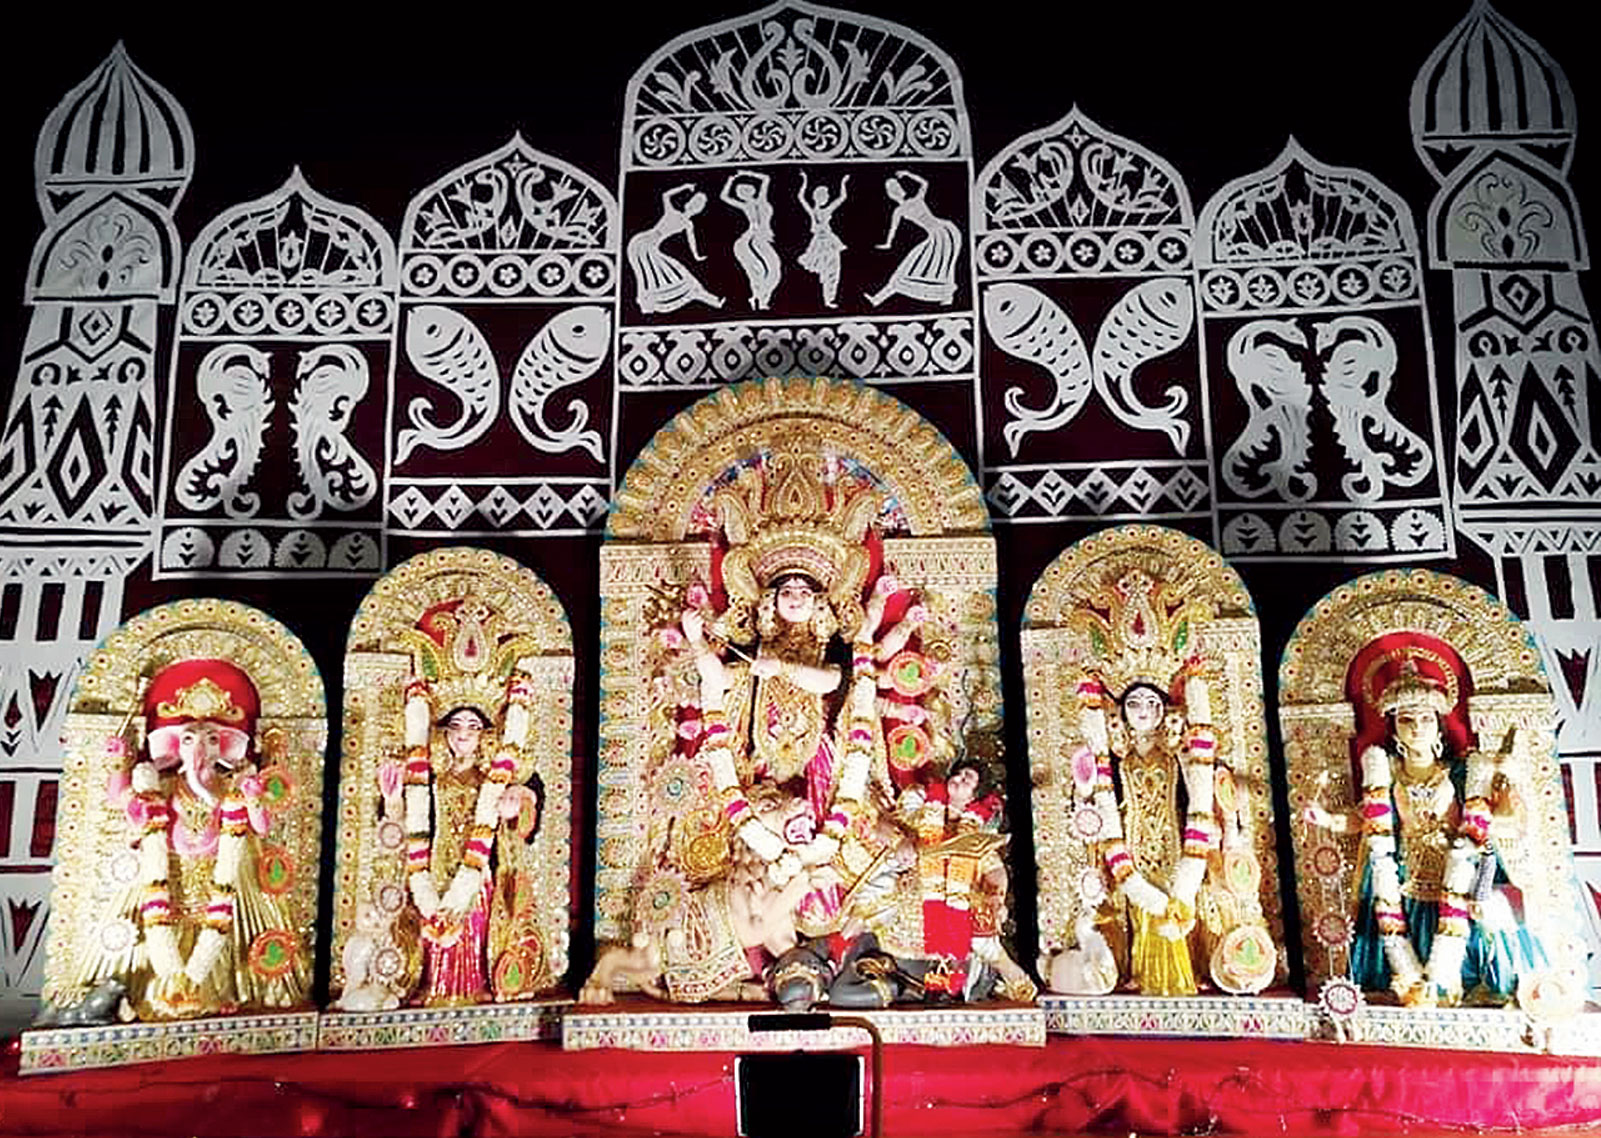 The Oslo Durga Puja is now 10 years old